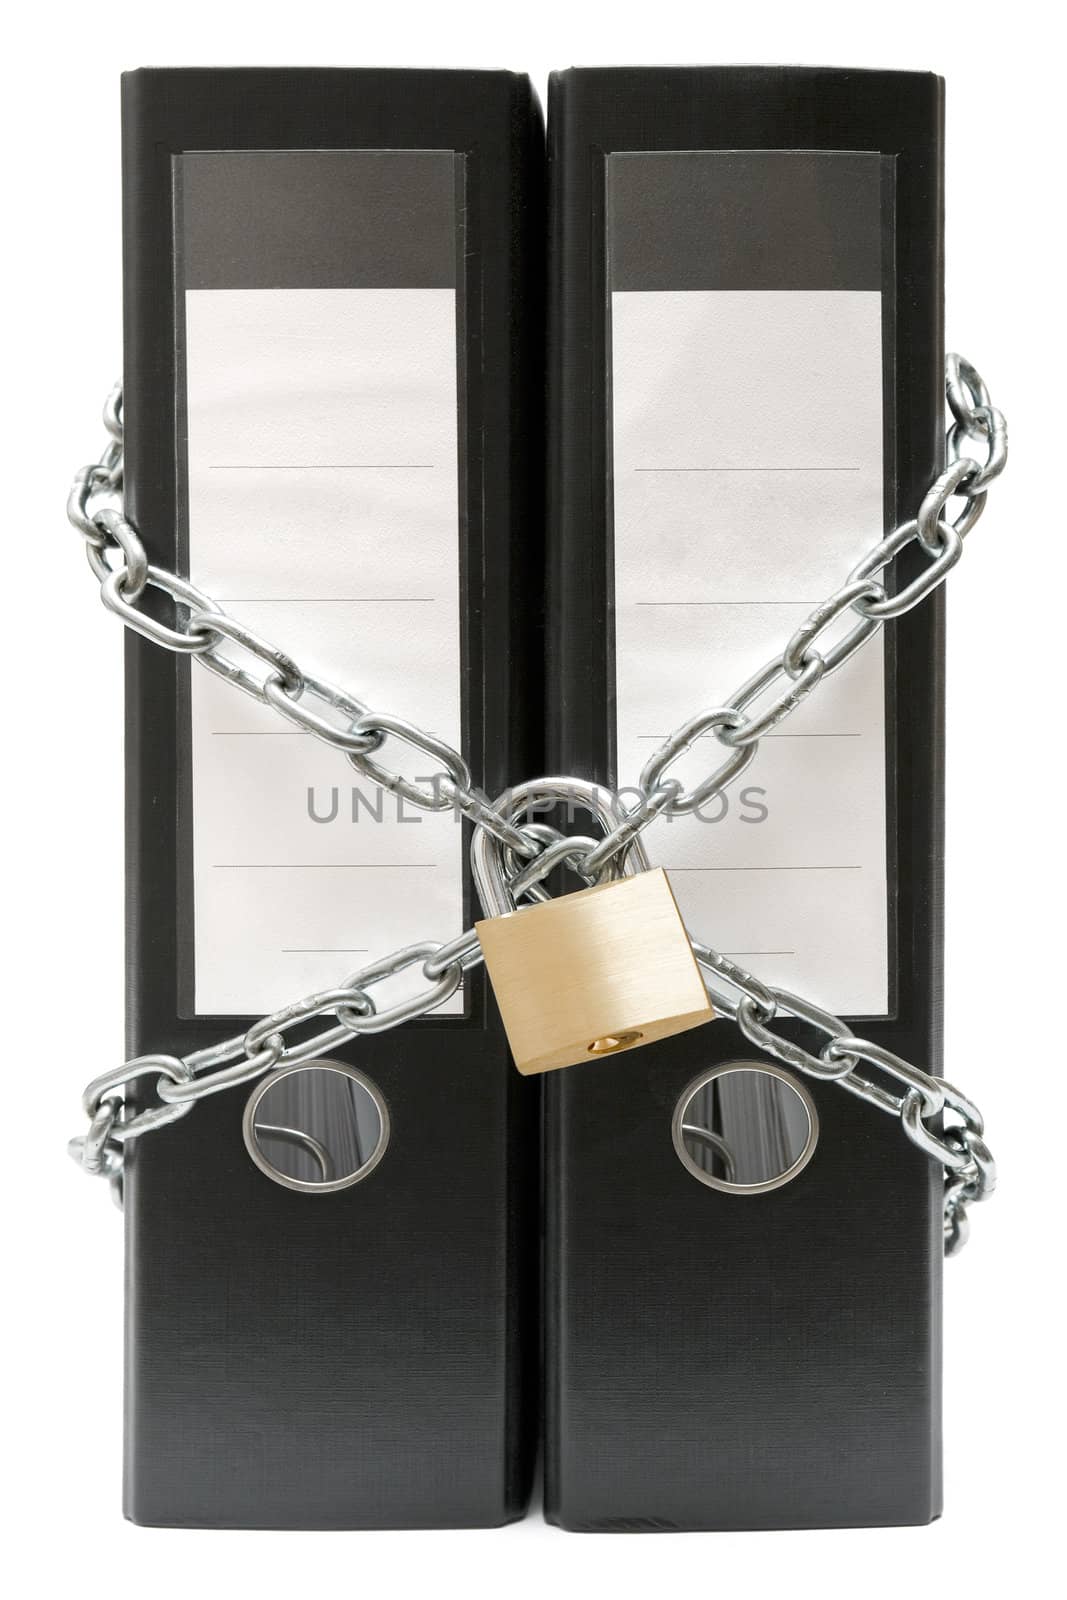 Two black file folders protected by a chain and a padlock. Isolated on a white background.